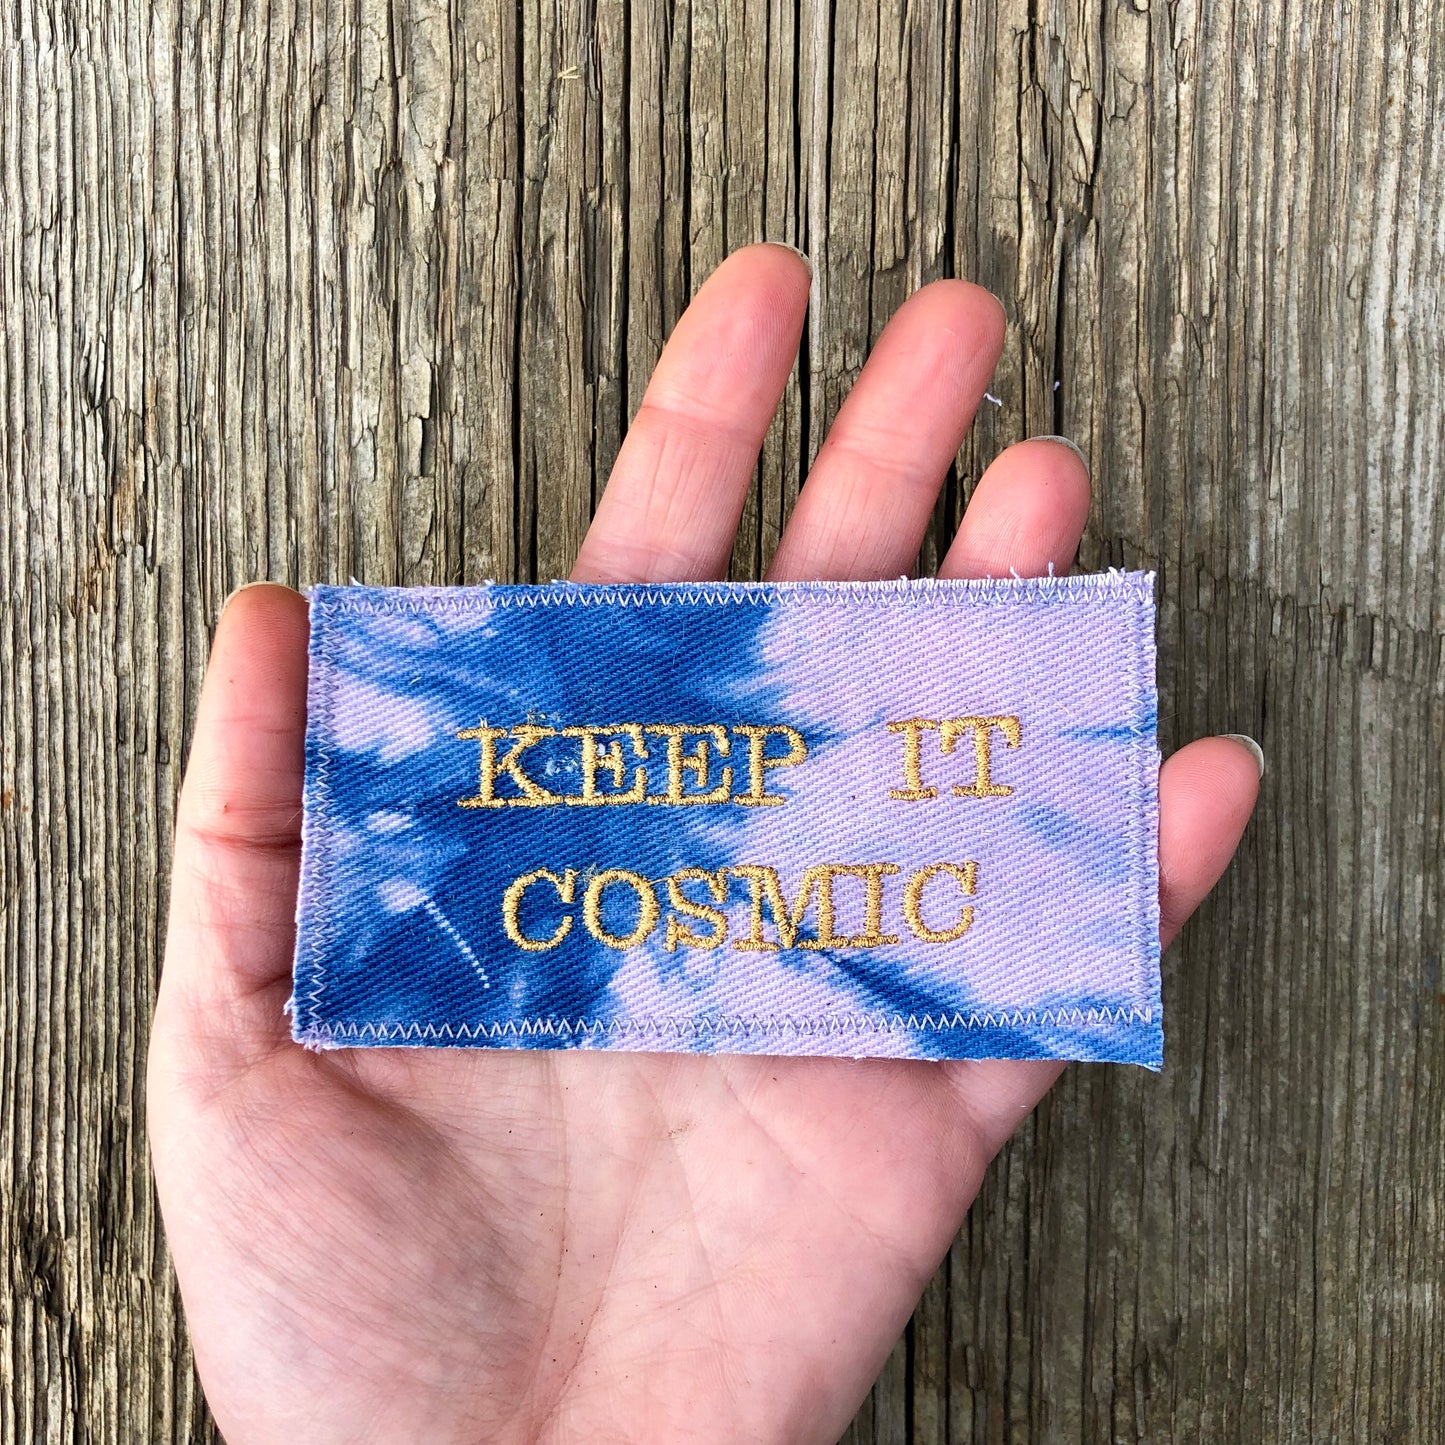 Keep it cosmic! Handmade Embroidered Tie Dyed Canvas Patch.